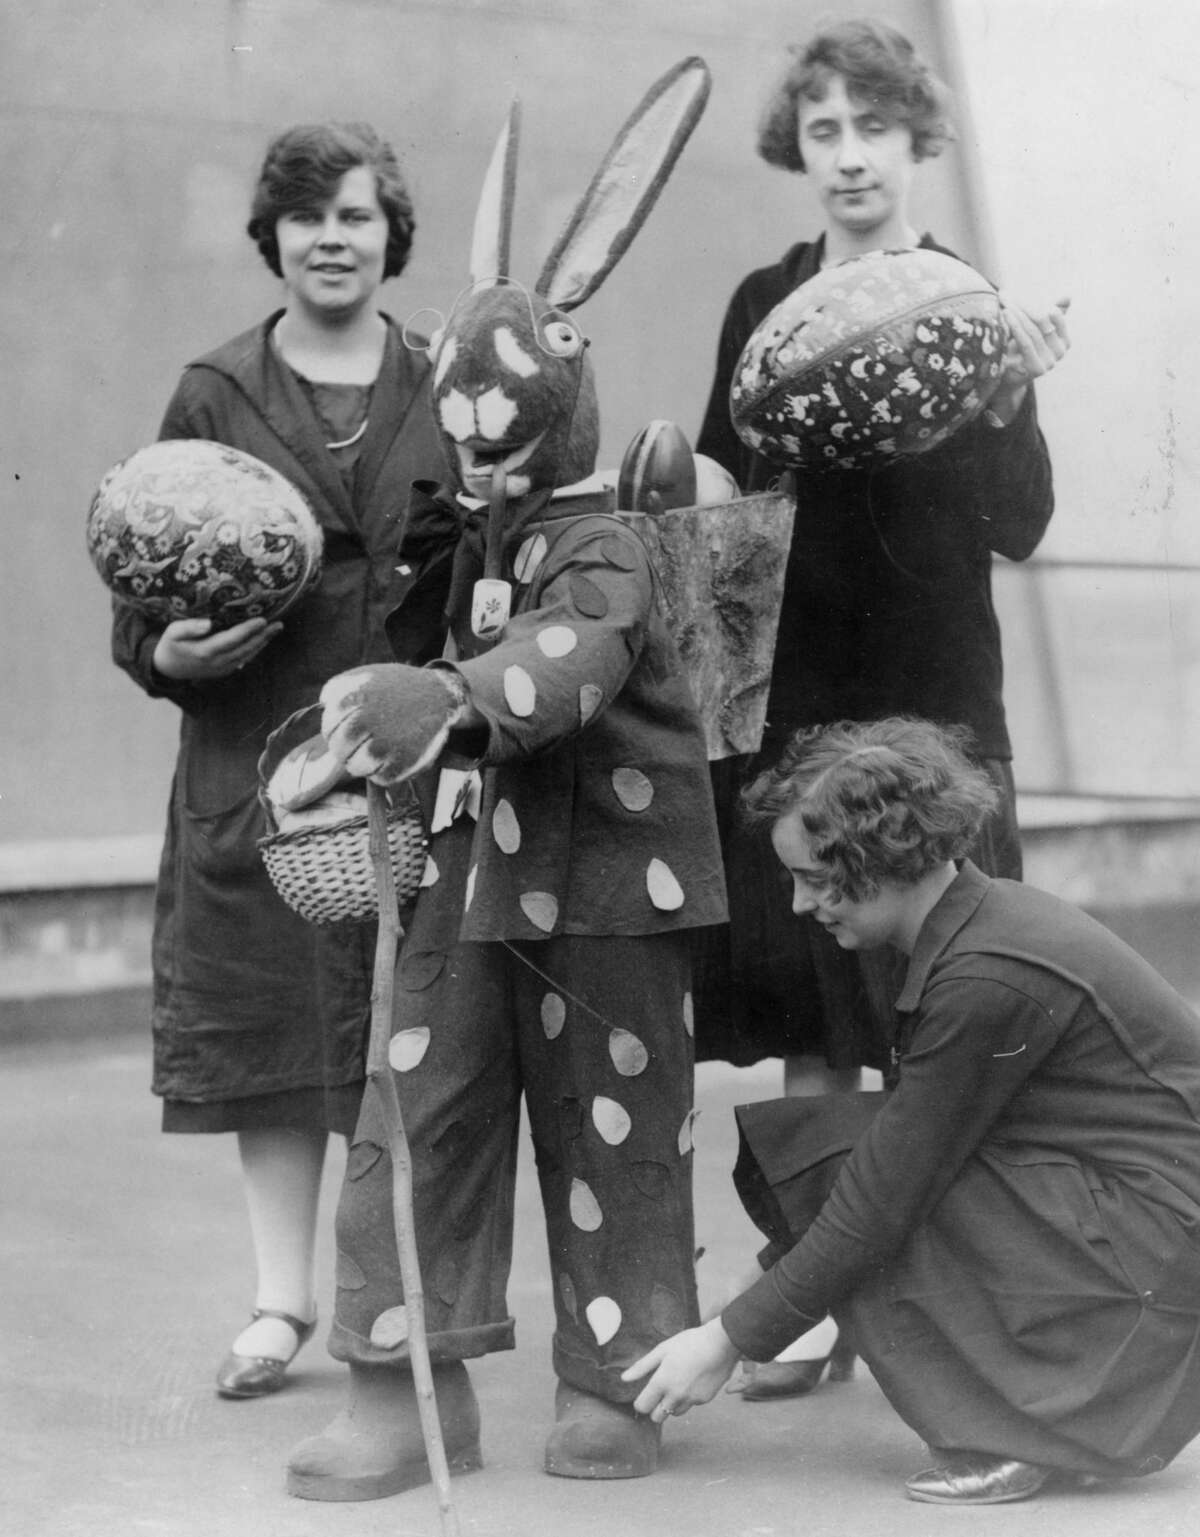 circa 1930: An Easter bunny carries easter eggs in a basket on his back while one woman adjusts his turn-ups and two others carry large easter eggs.